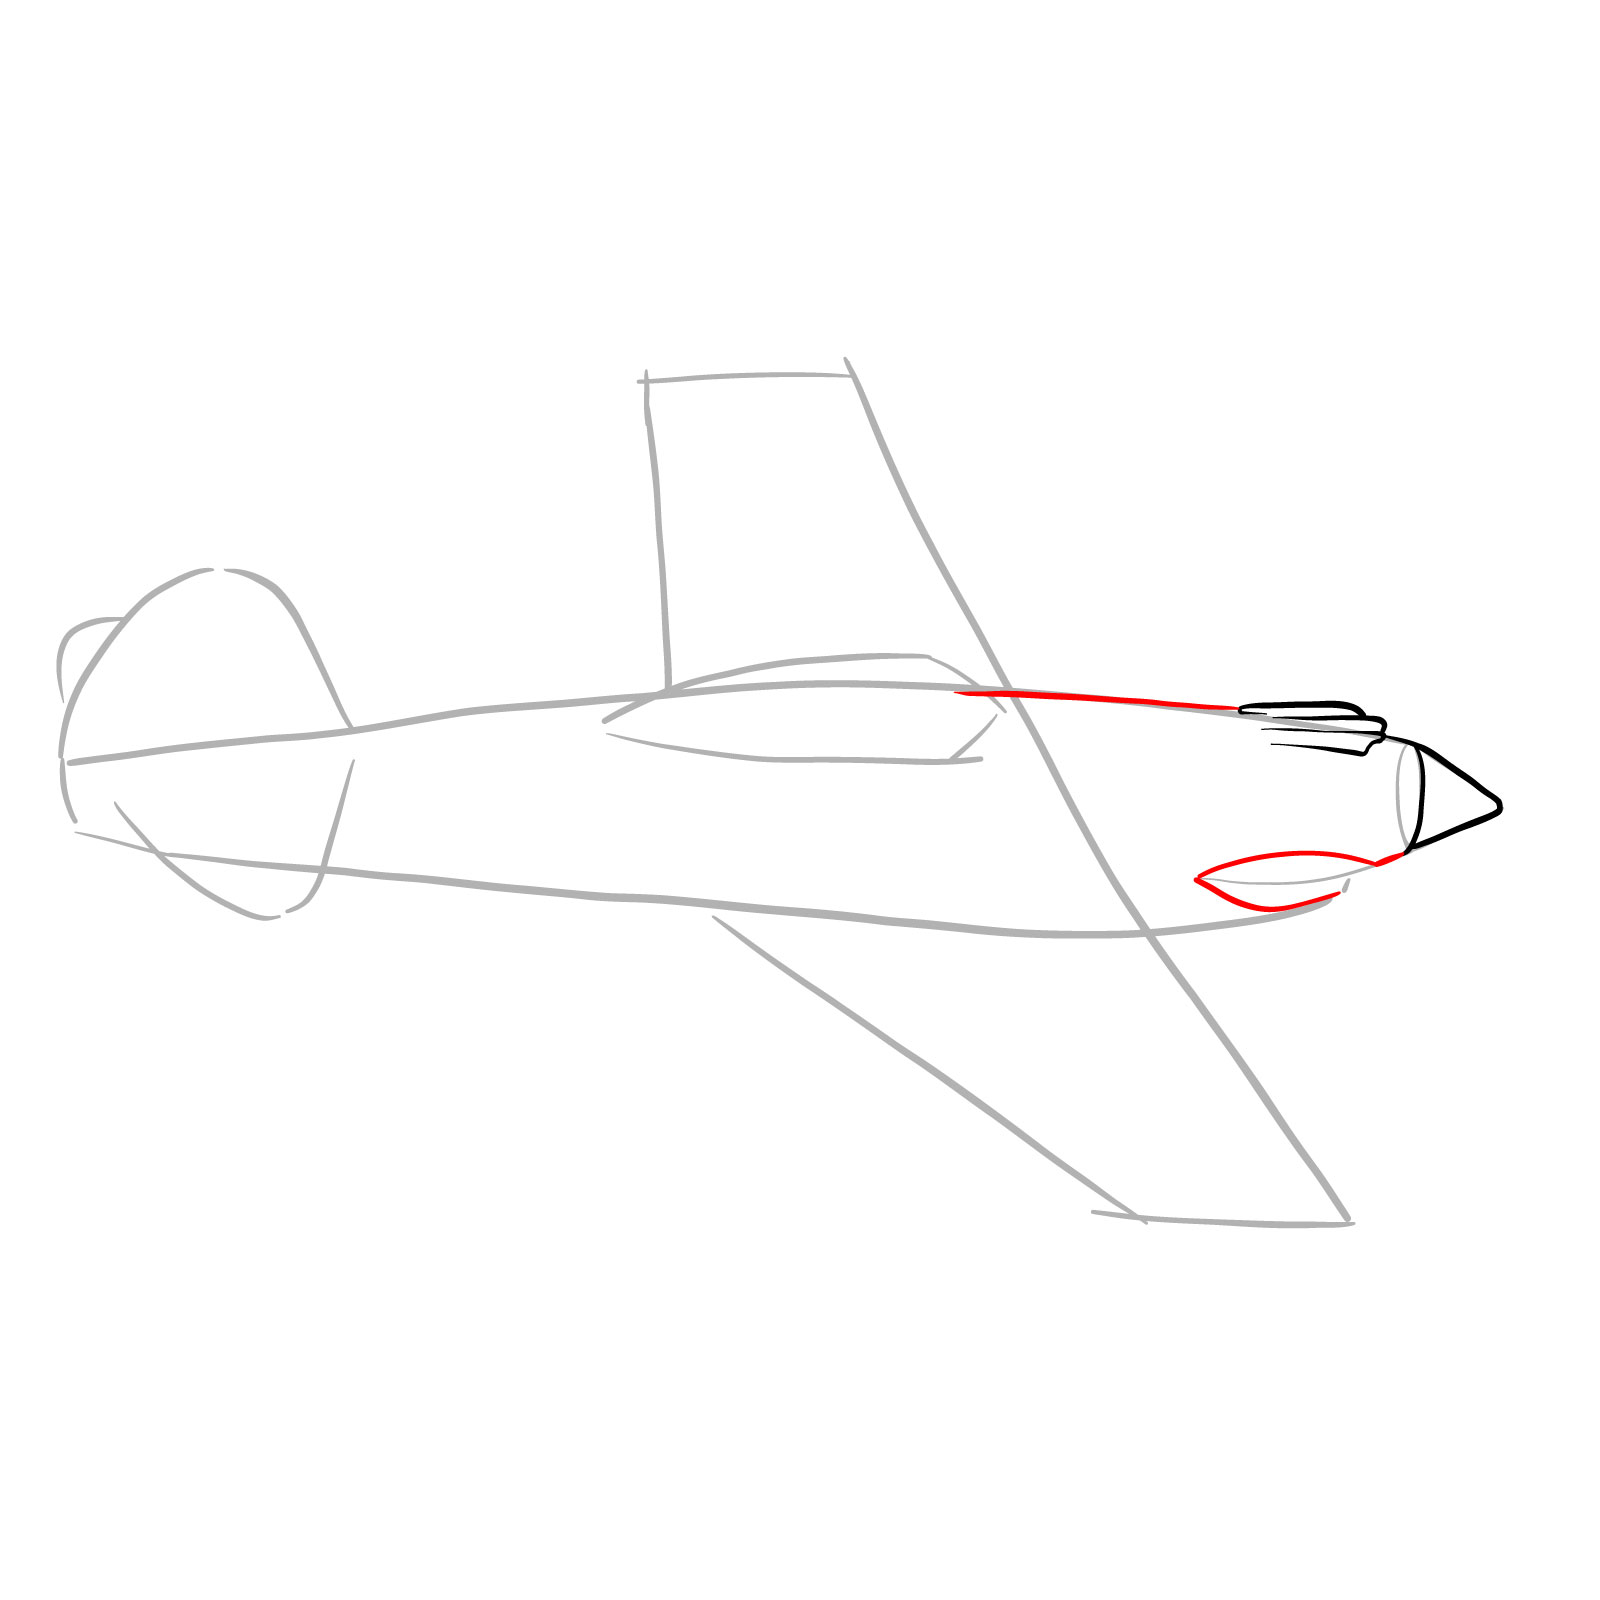 How to draw a P-40 Flying Tiger - step 06